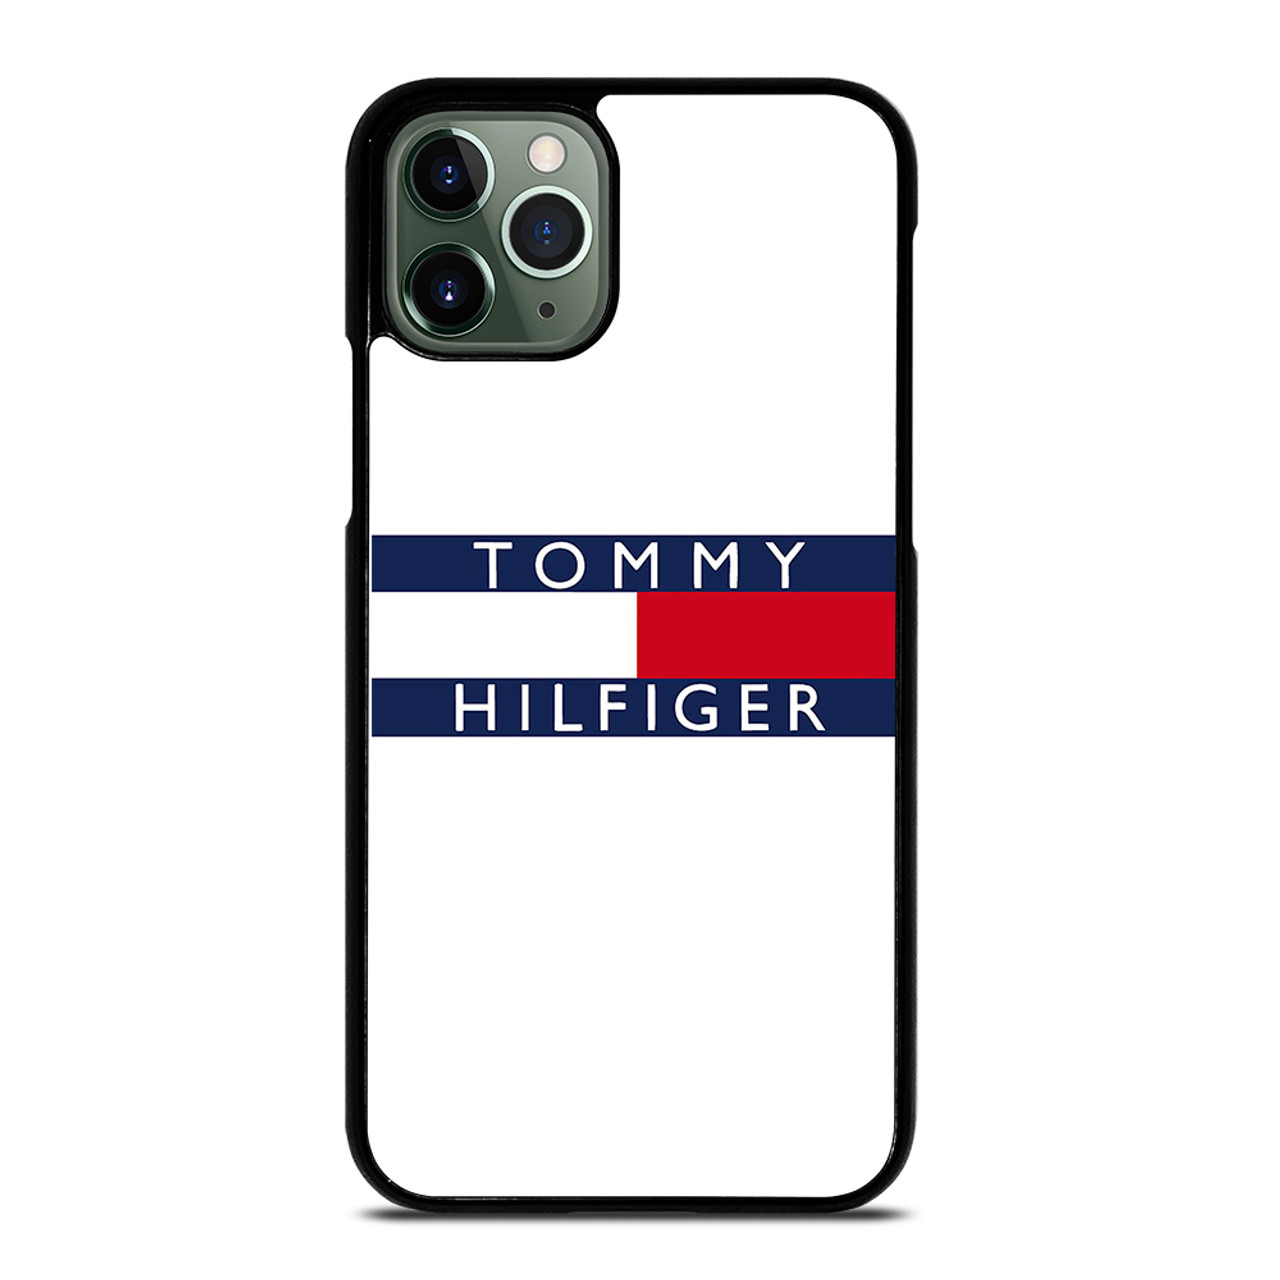 TOMMY HILFIGER 4 iPhone 11 Max Case